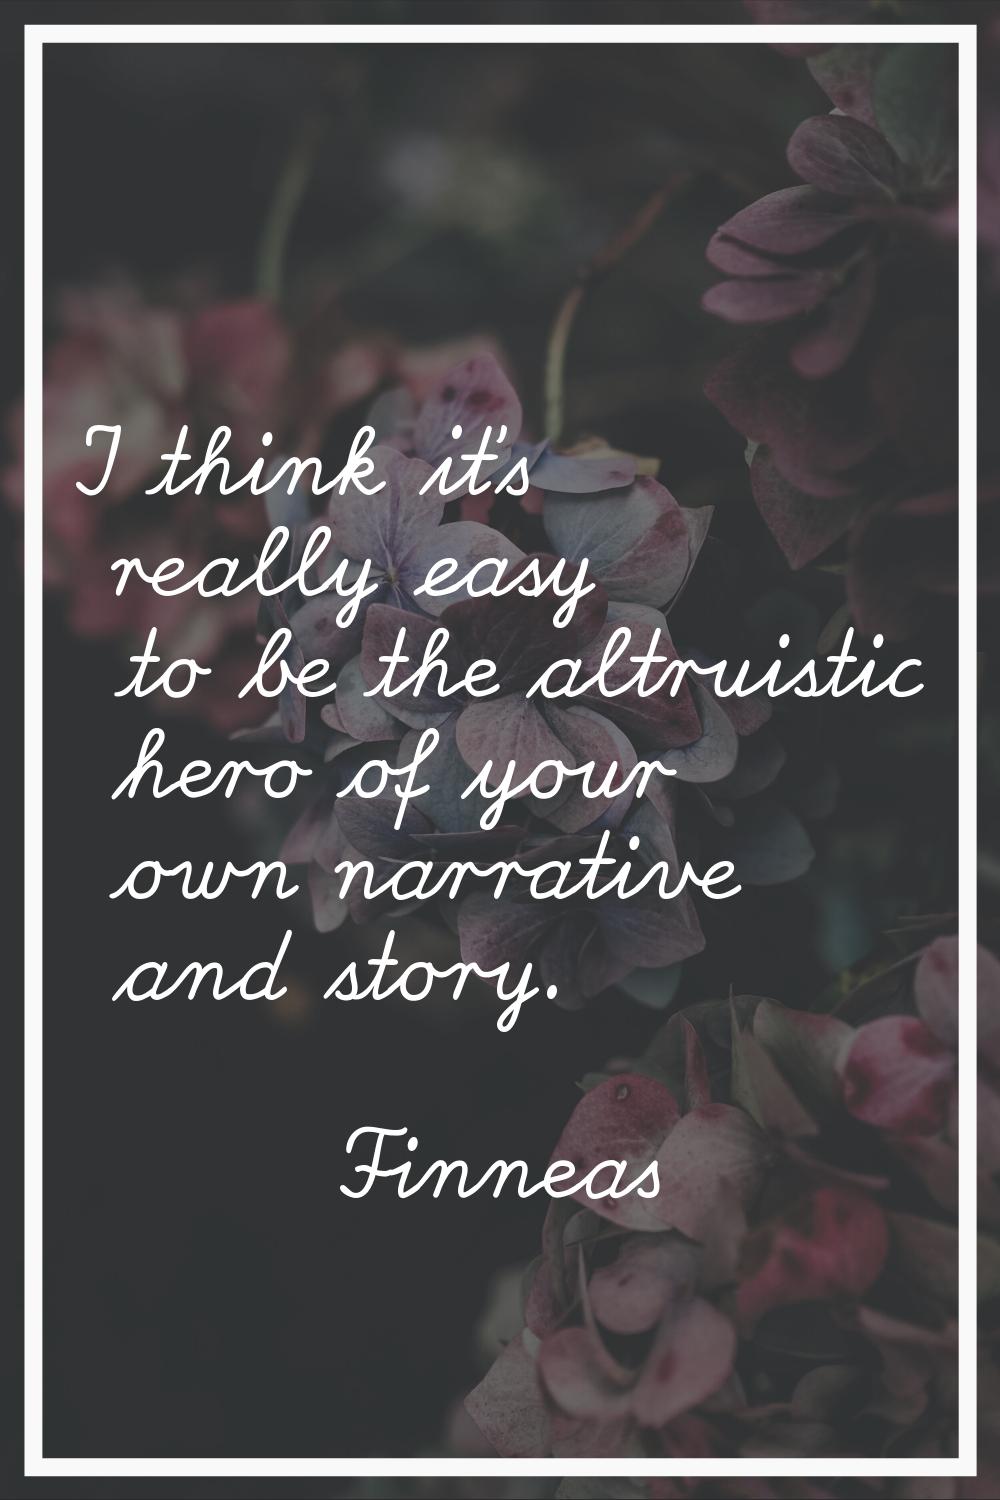 I think it's really easy to be the altruistic hero of your own narrative and story.